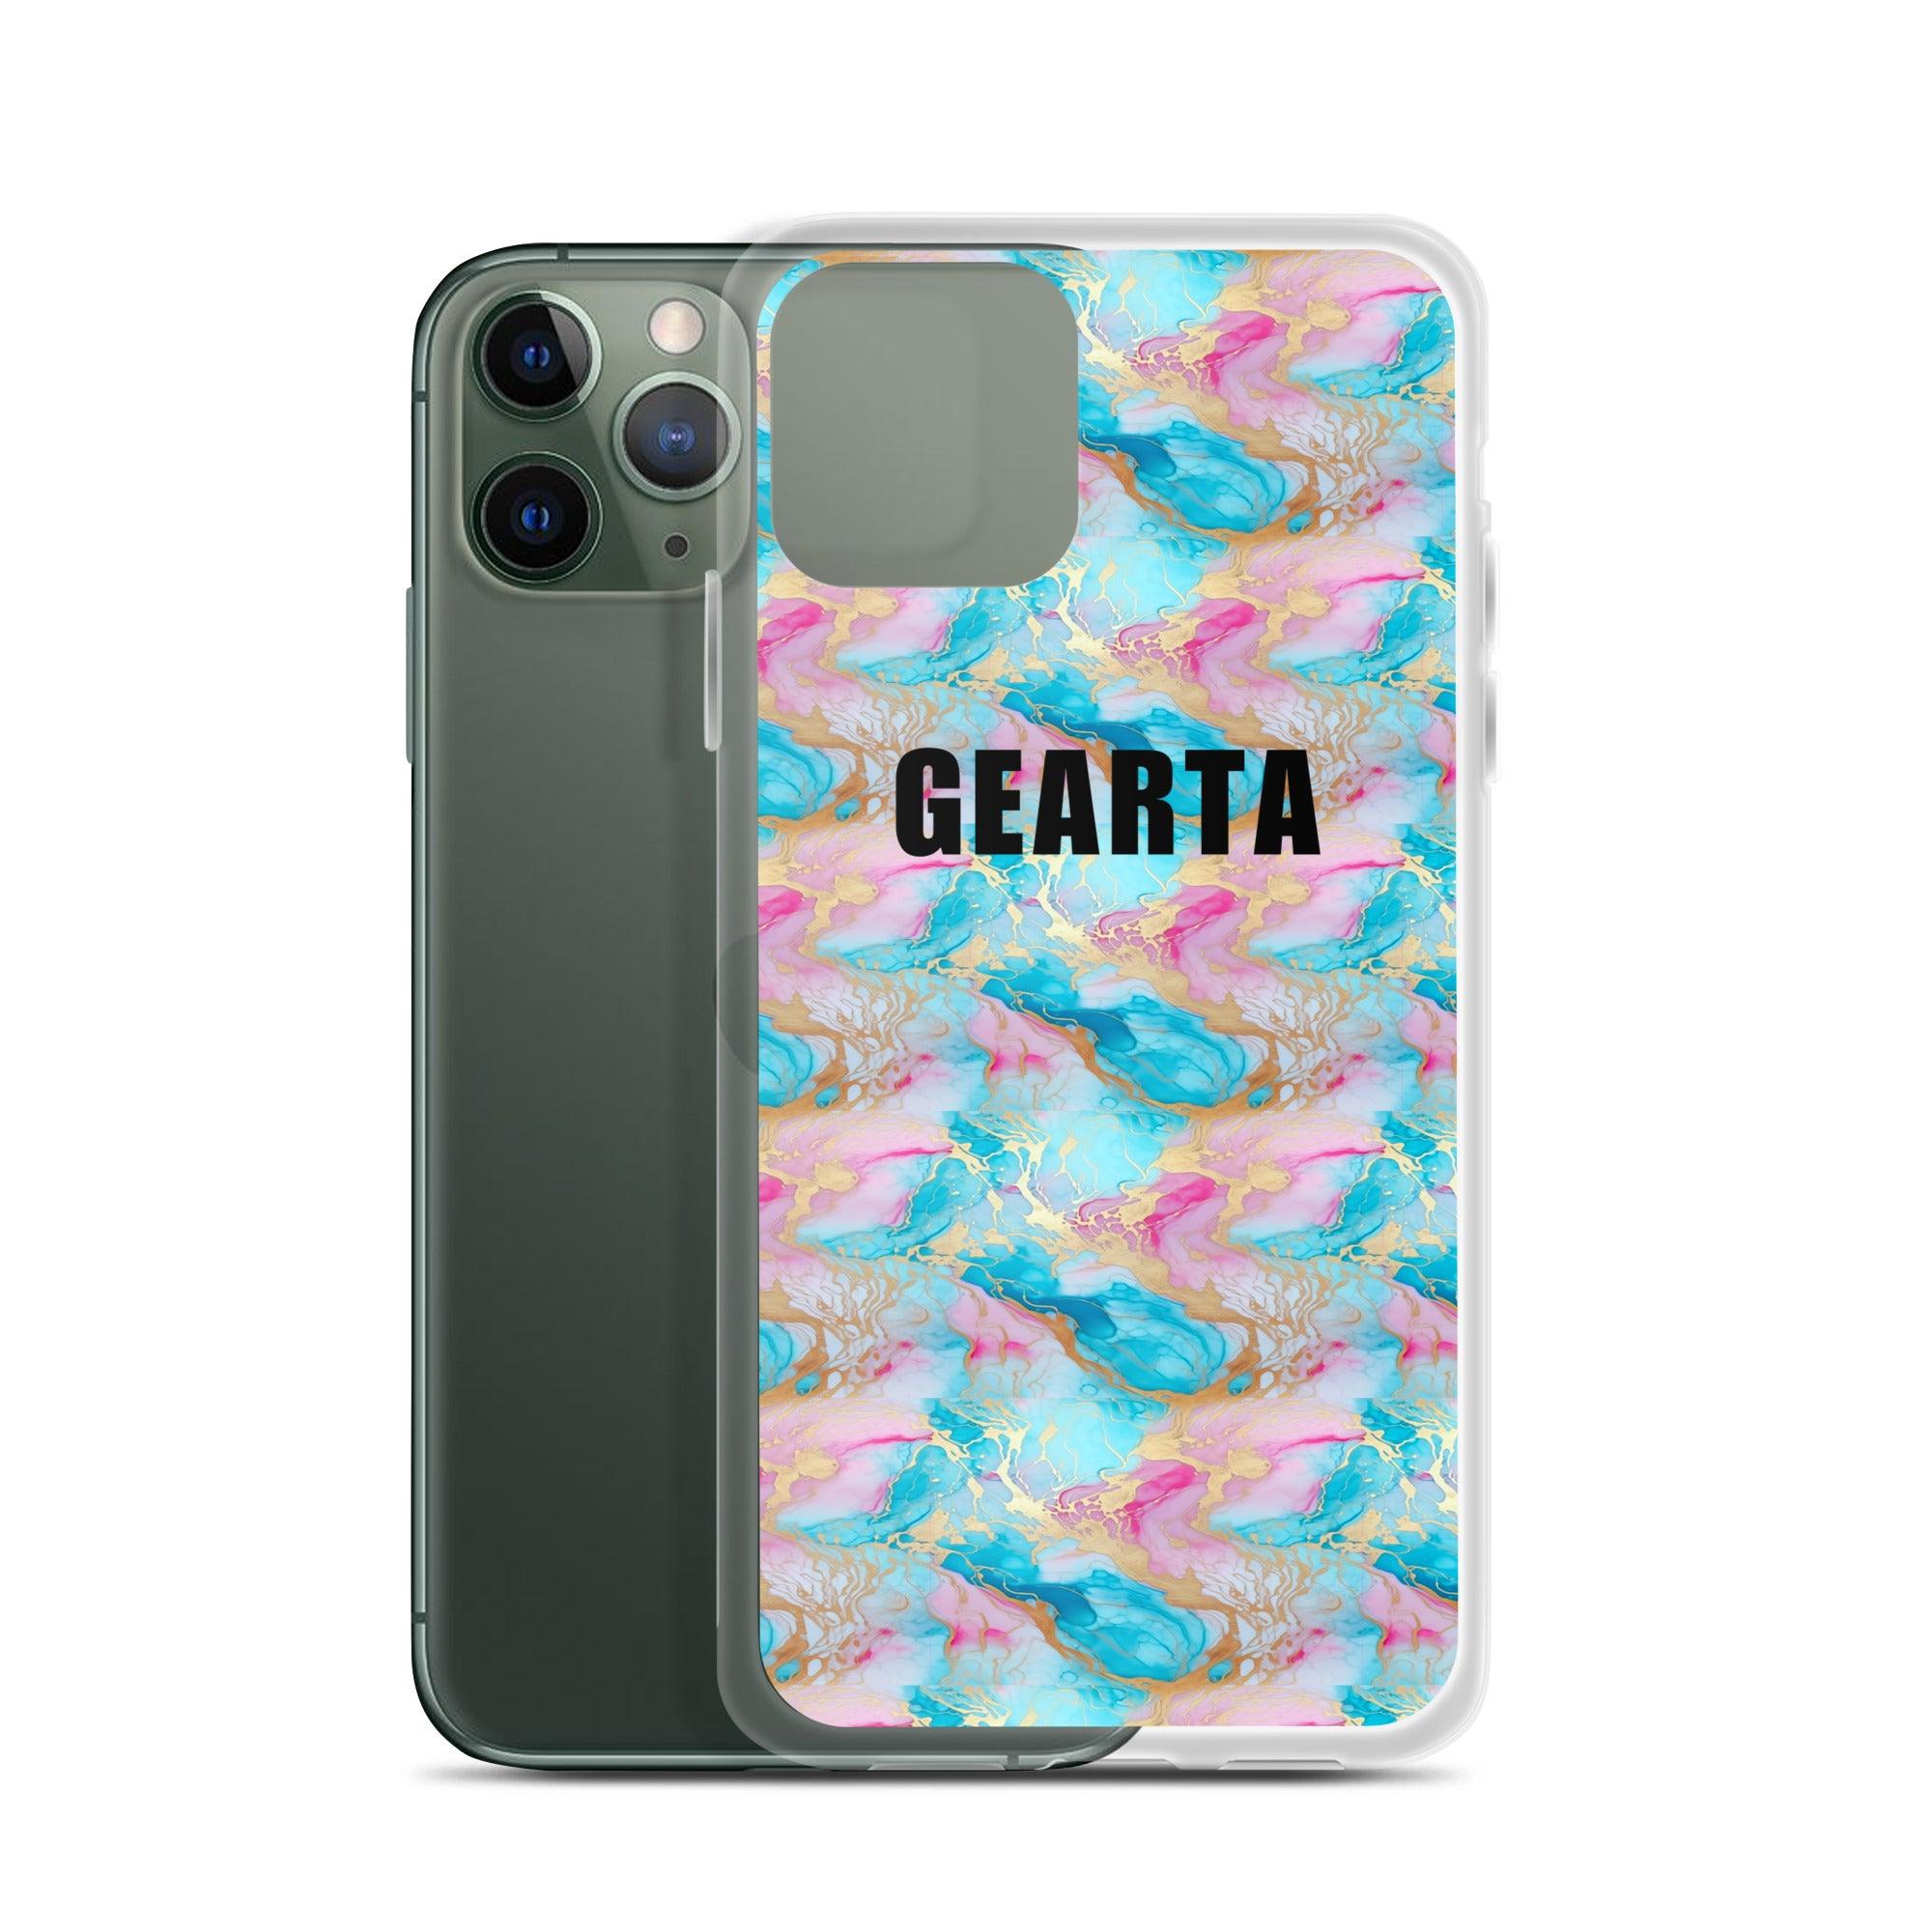 GEARTA - Marble Pink & Blue iPhone Case